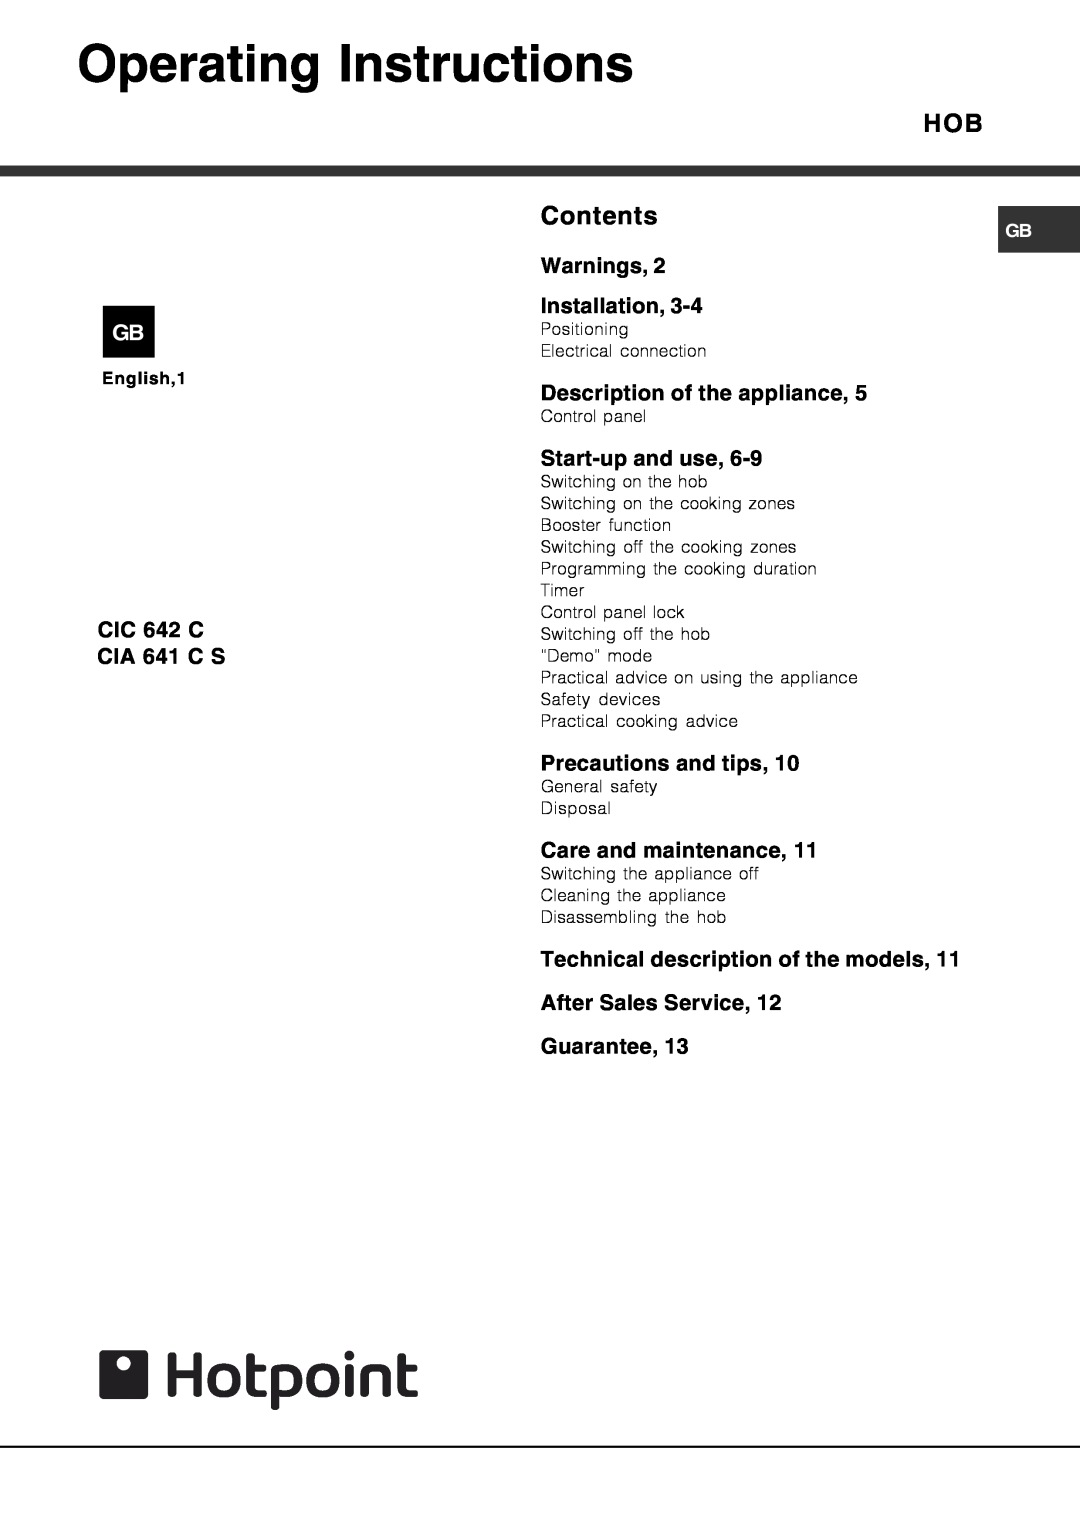 Hotpoint CIC 642 C manual Operating Instructions, Installation, Description of the appliance, Start-up and use, Guarantee 